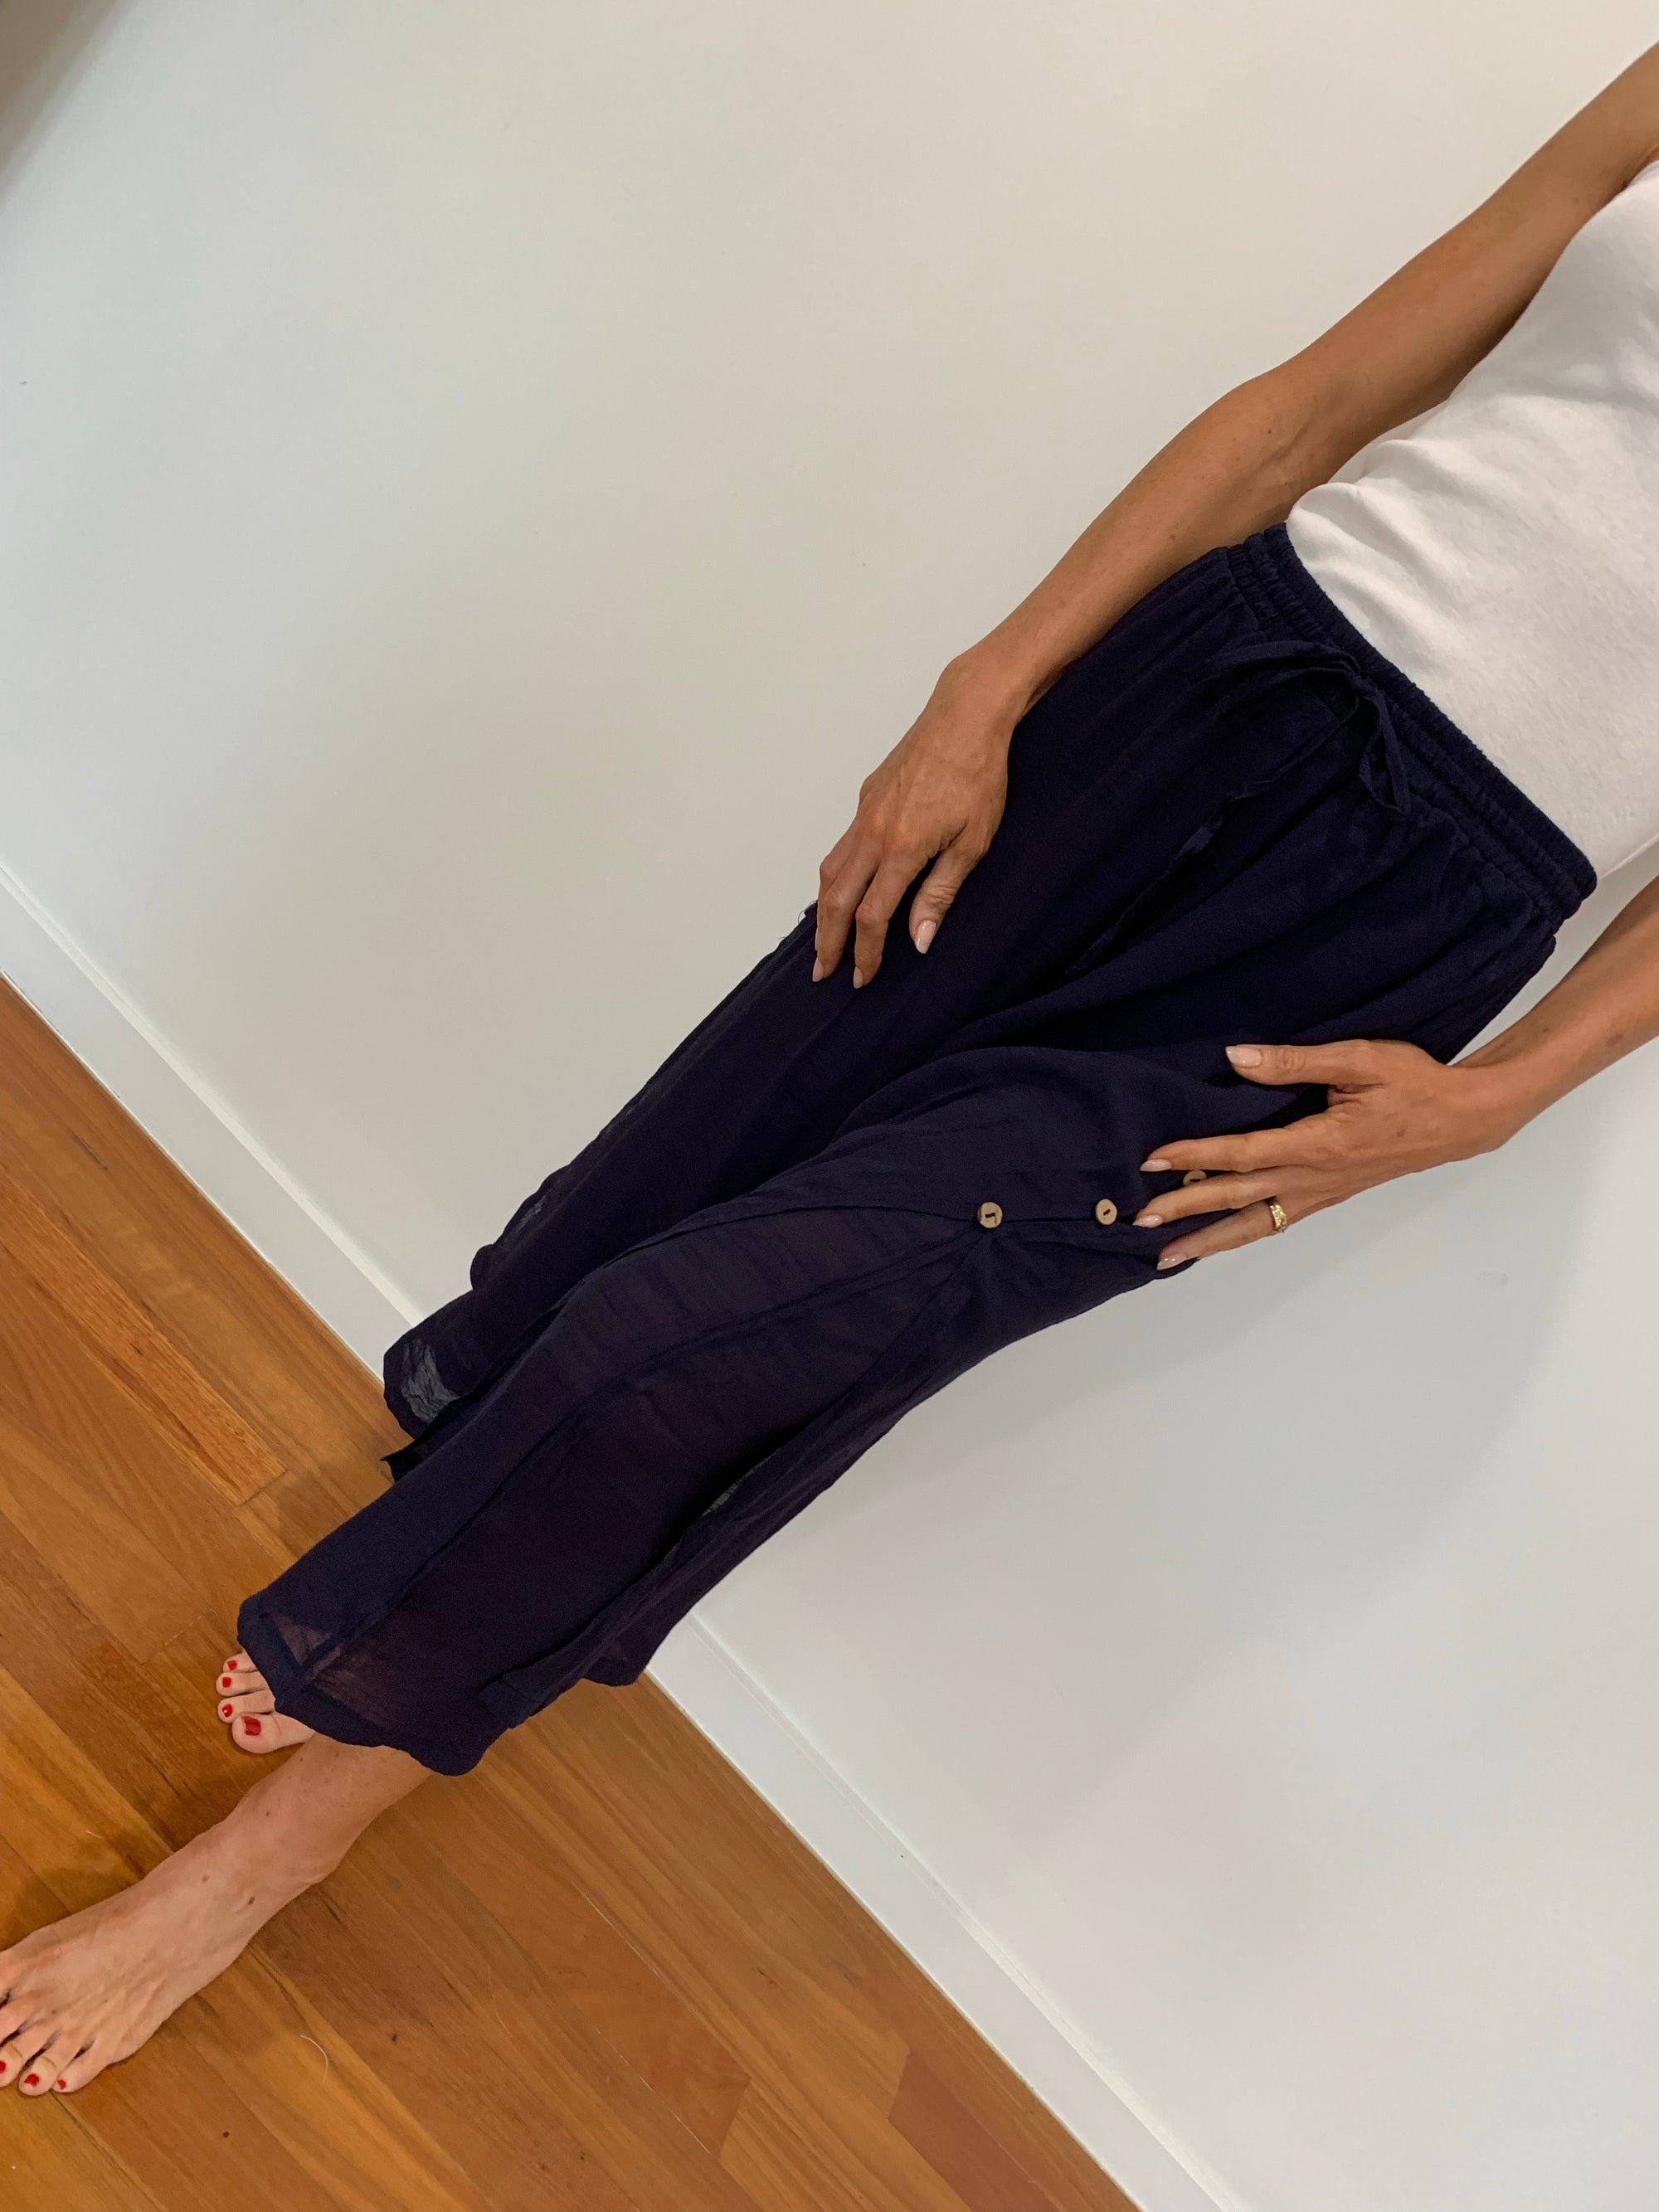 Layered Flowing Beach Pants with Wooden Buttons Resort Wear